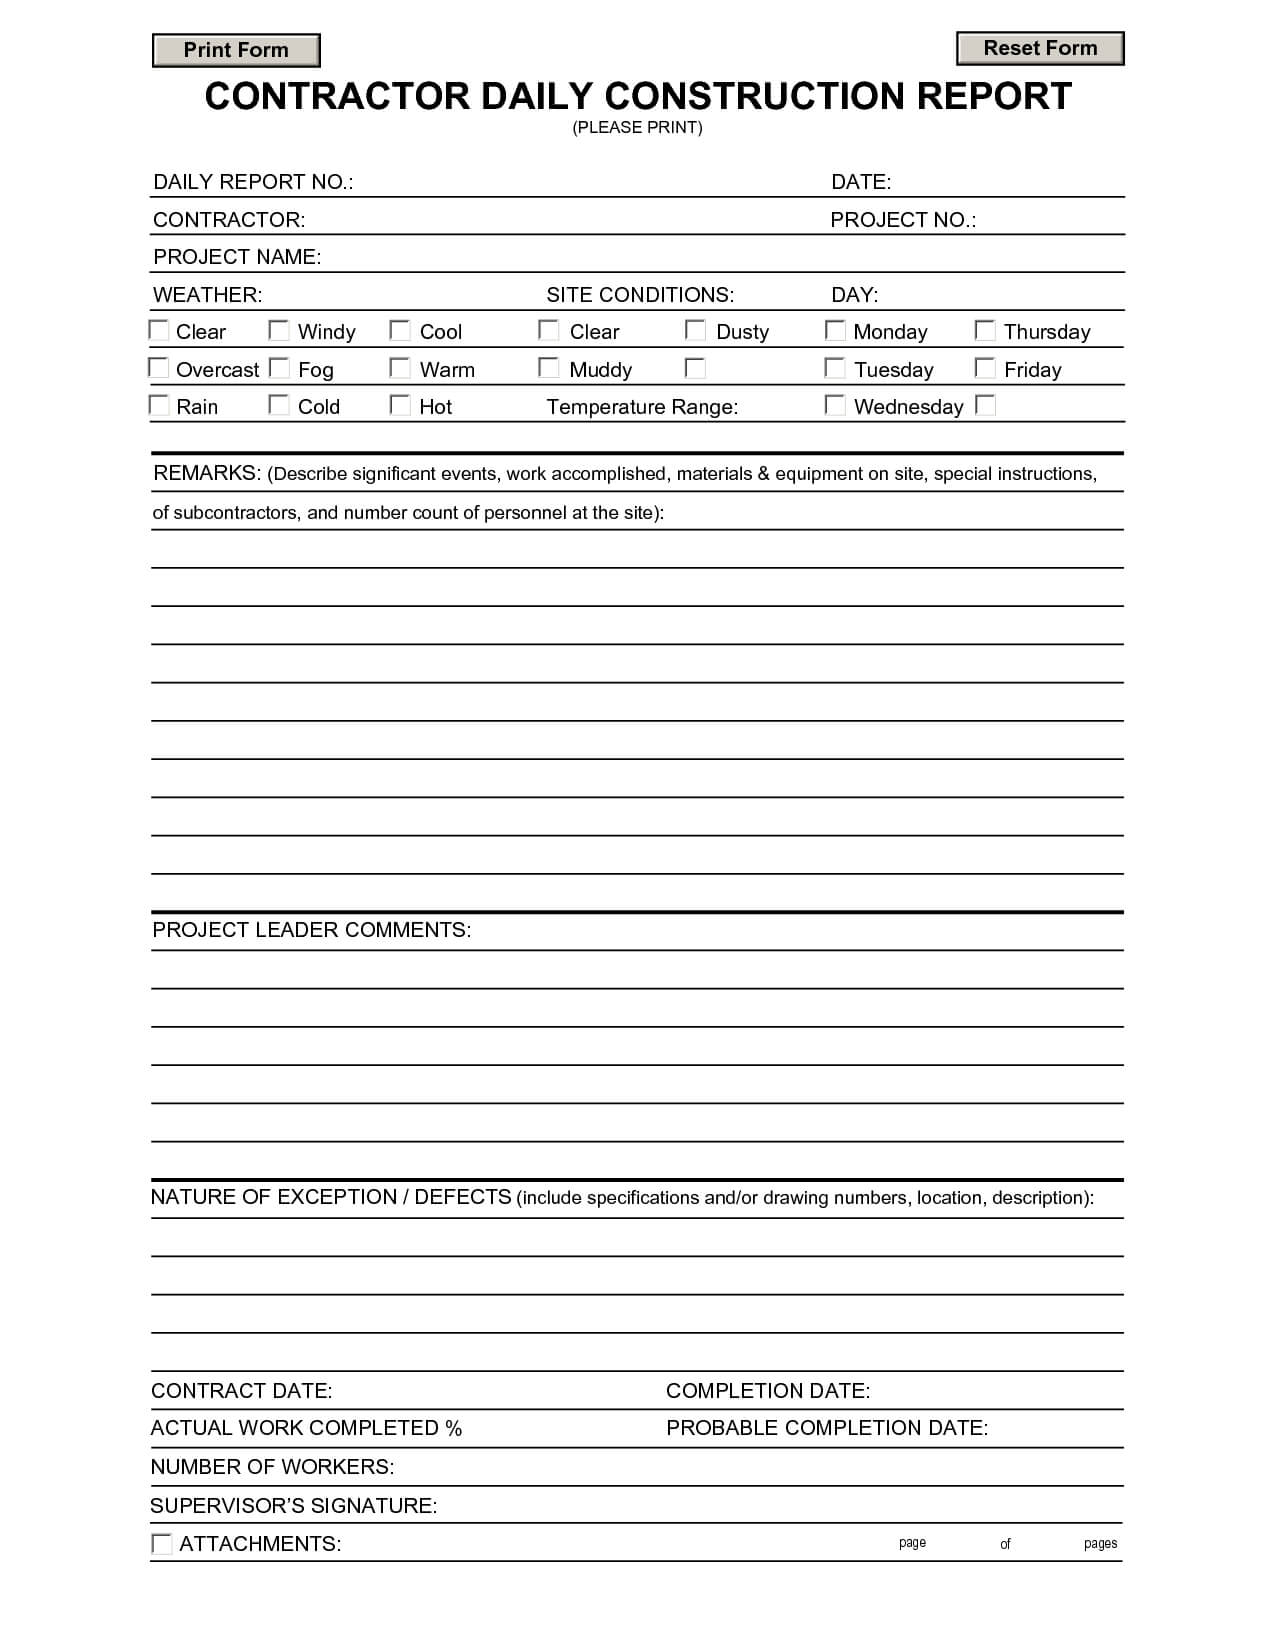 Construction Daily Report Template | Contractors | Report With Regard To Construction Daily Report Template Free